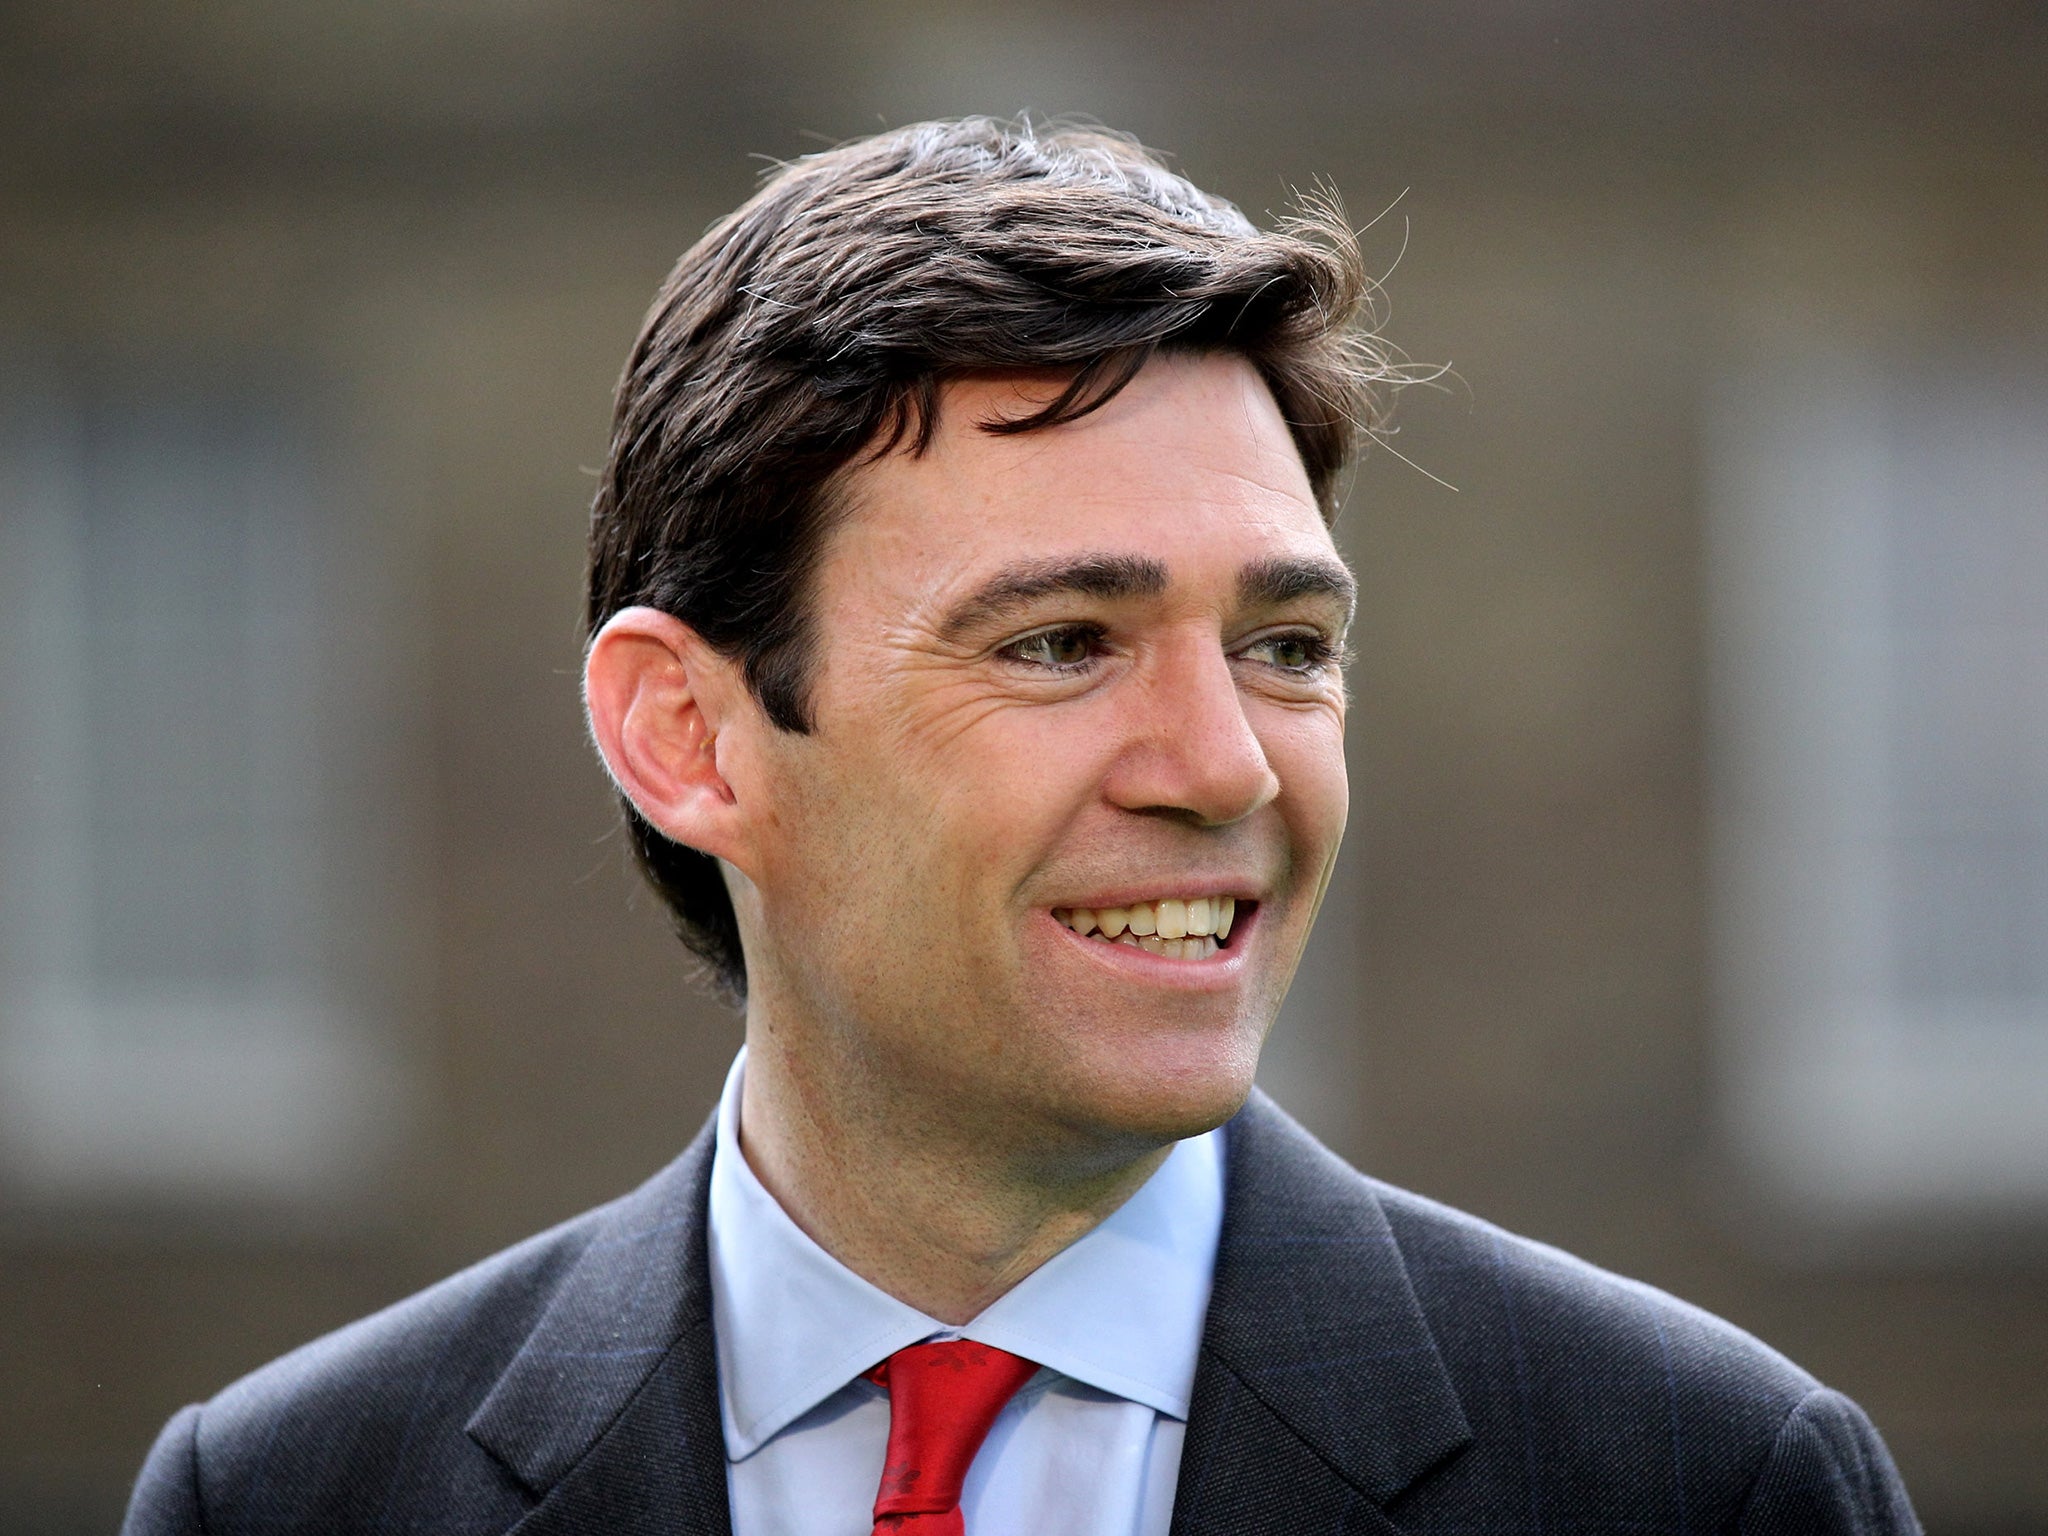 Mandelson's comments could scupper Andy Burnham's leadership prospects